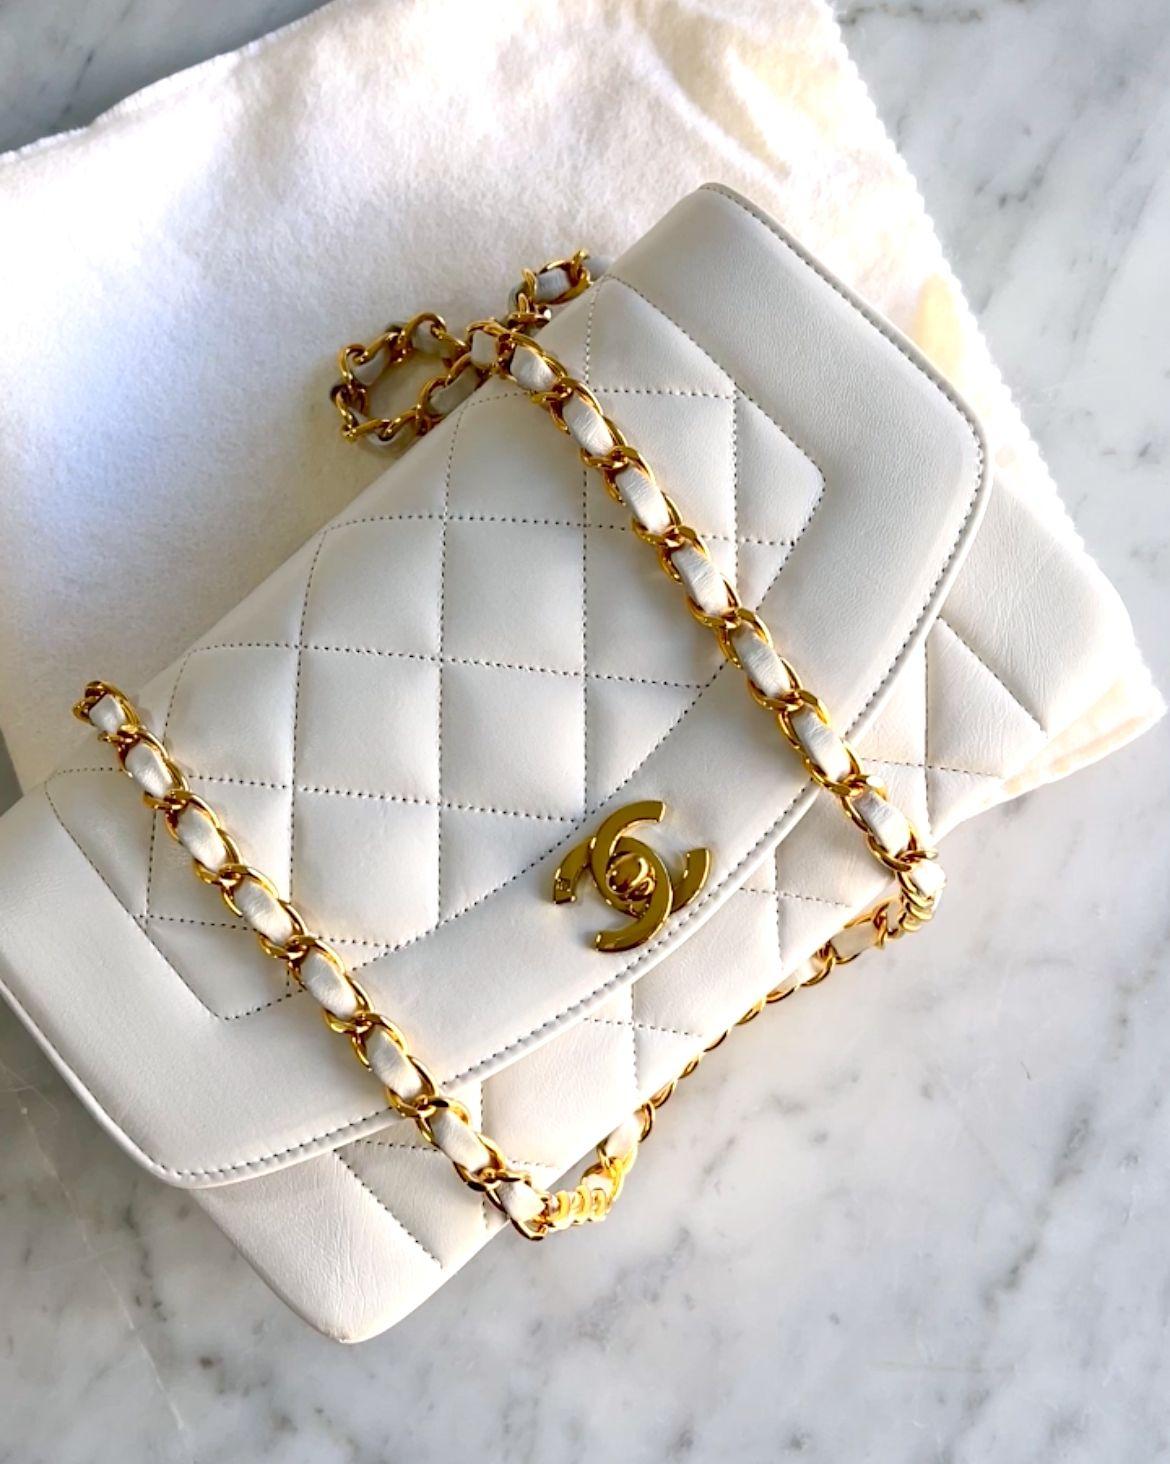 Vintage Chanel vs. New - Why Vintage Chanel is Having a Moment – Sellier